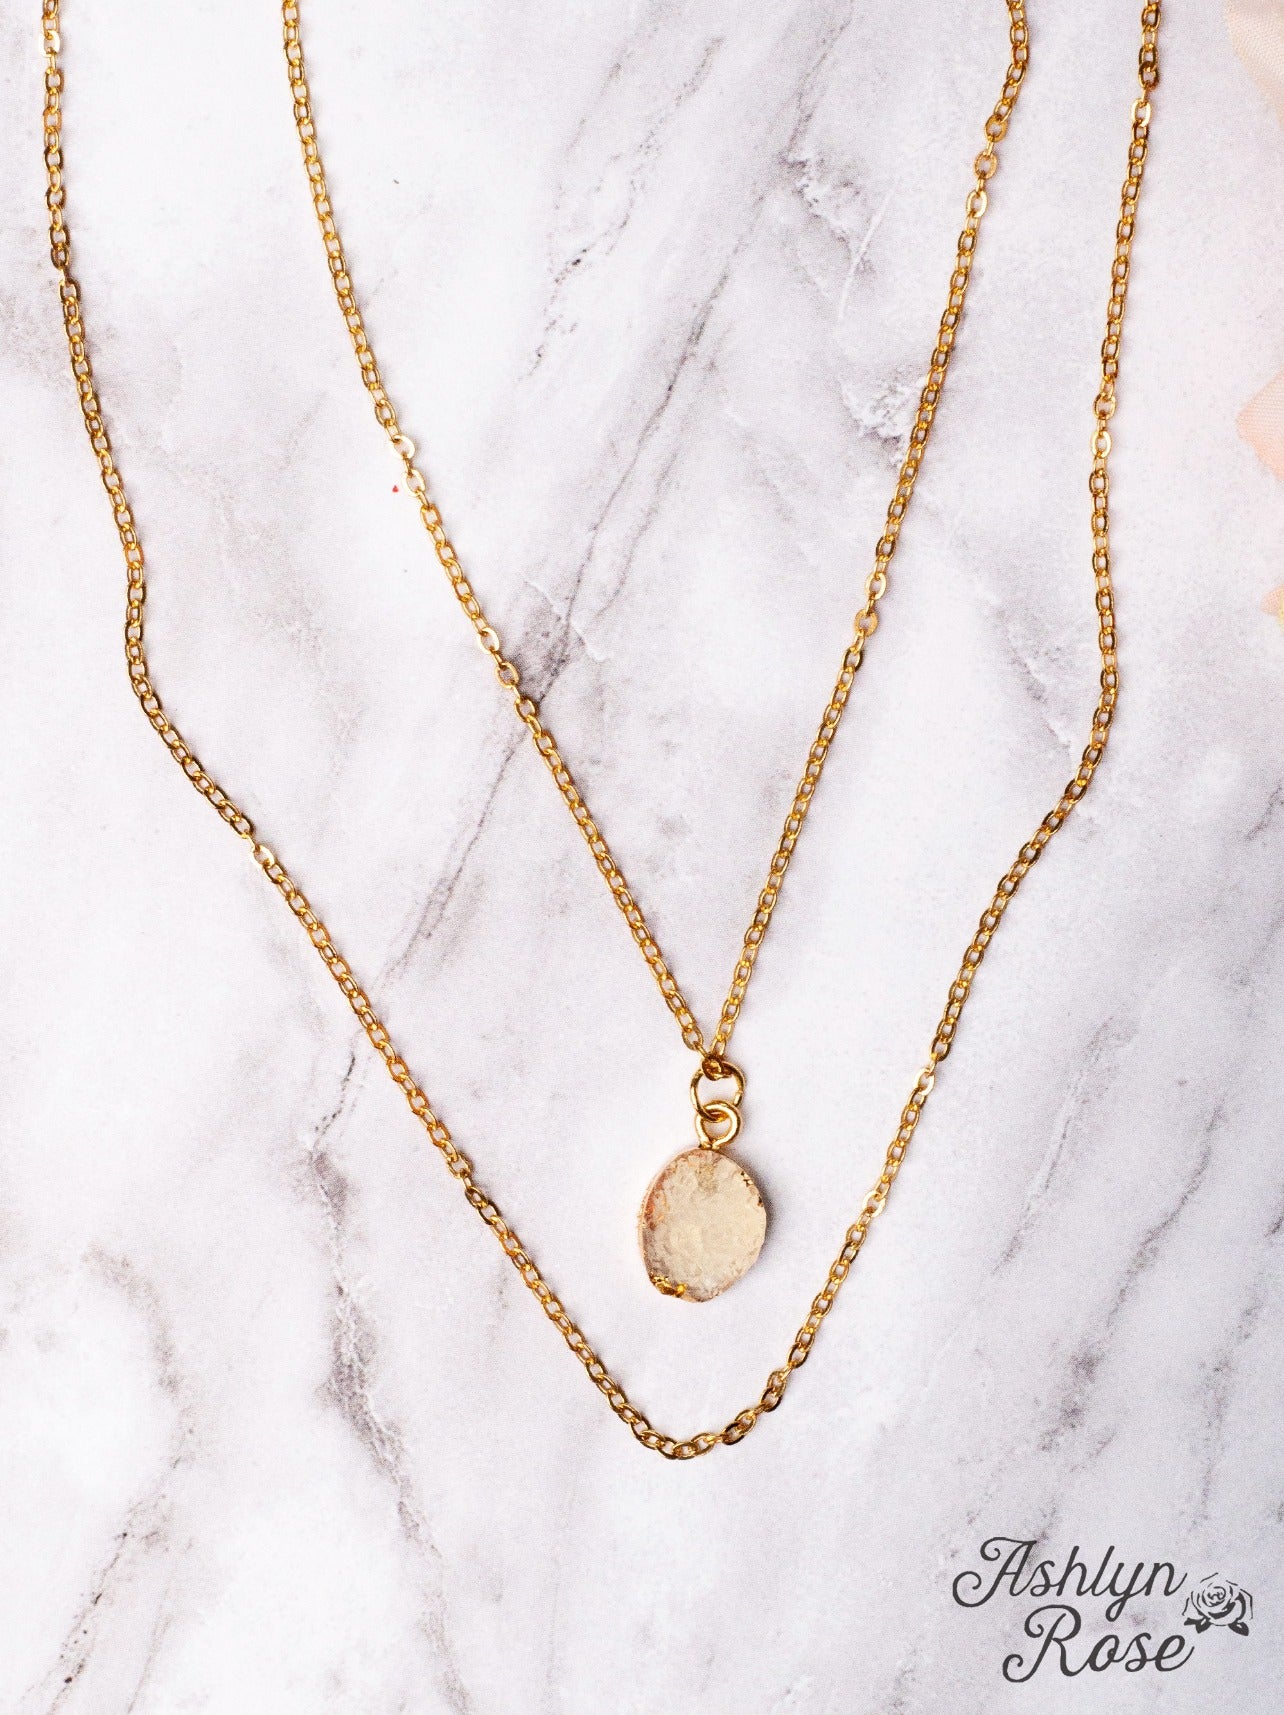 ME, MYSELF AND I CLEAR DRUZY QUARTZ LAYERED NECKLACE